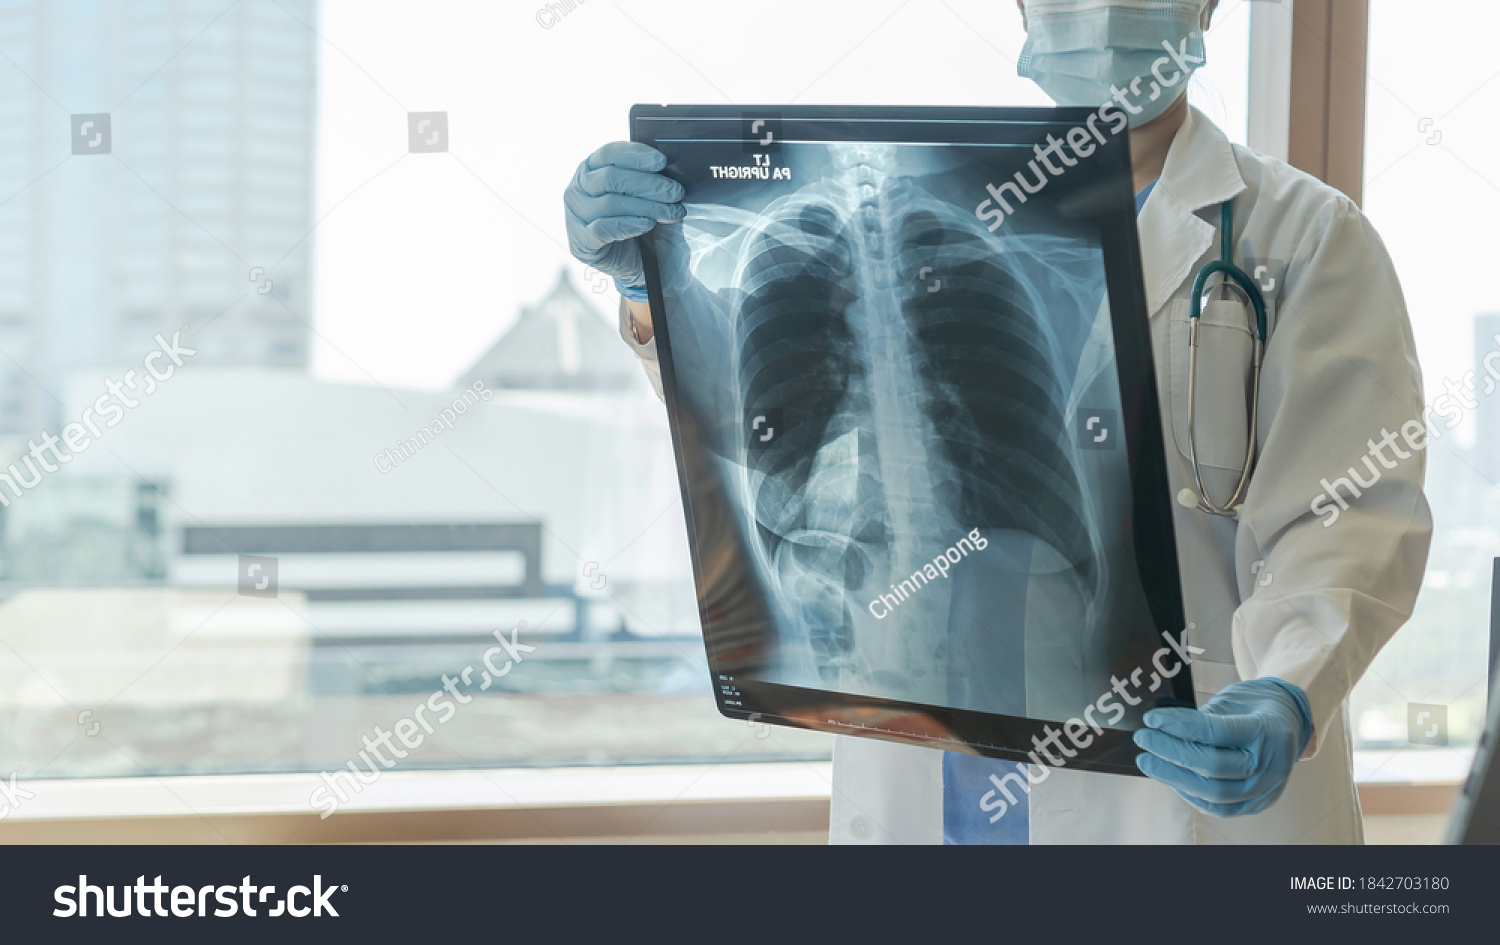 Doctor diagnosing patient’s health on asthma, lung disease, COVID-19 or bone cancer illness with radiological chest x-ray film for medical healthcare hospital service #1842703180